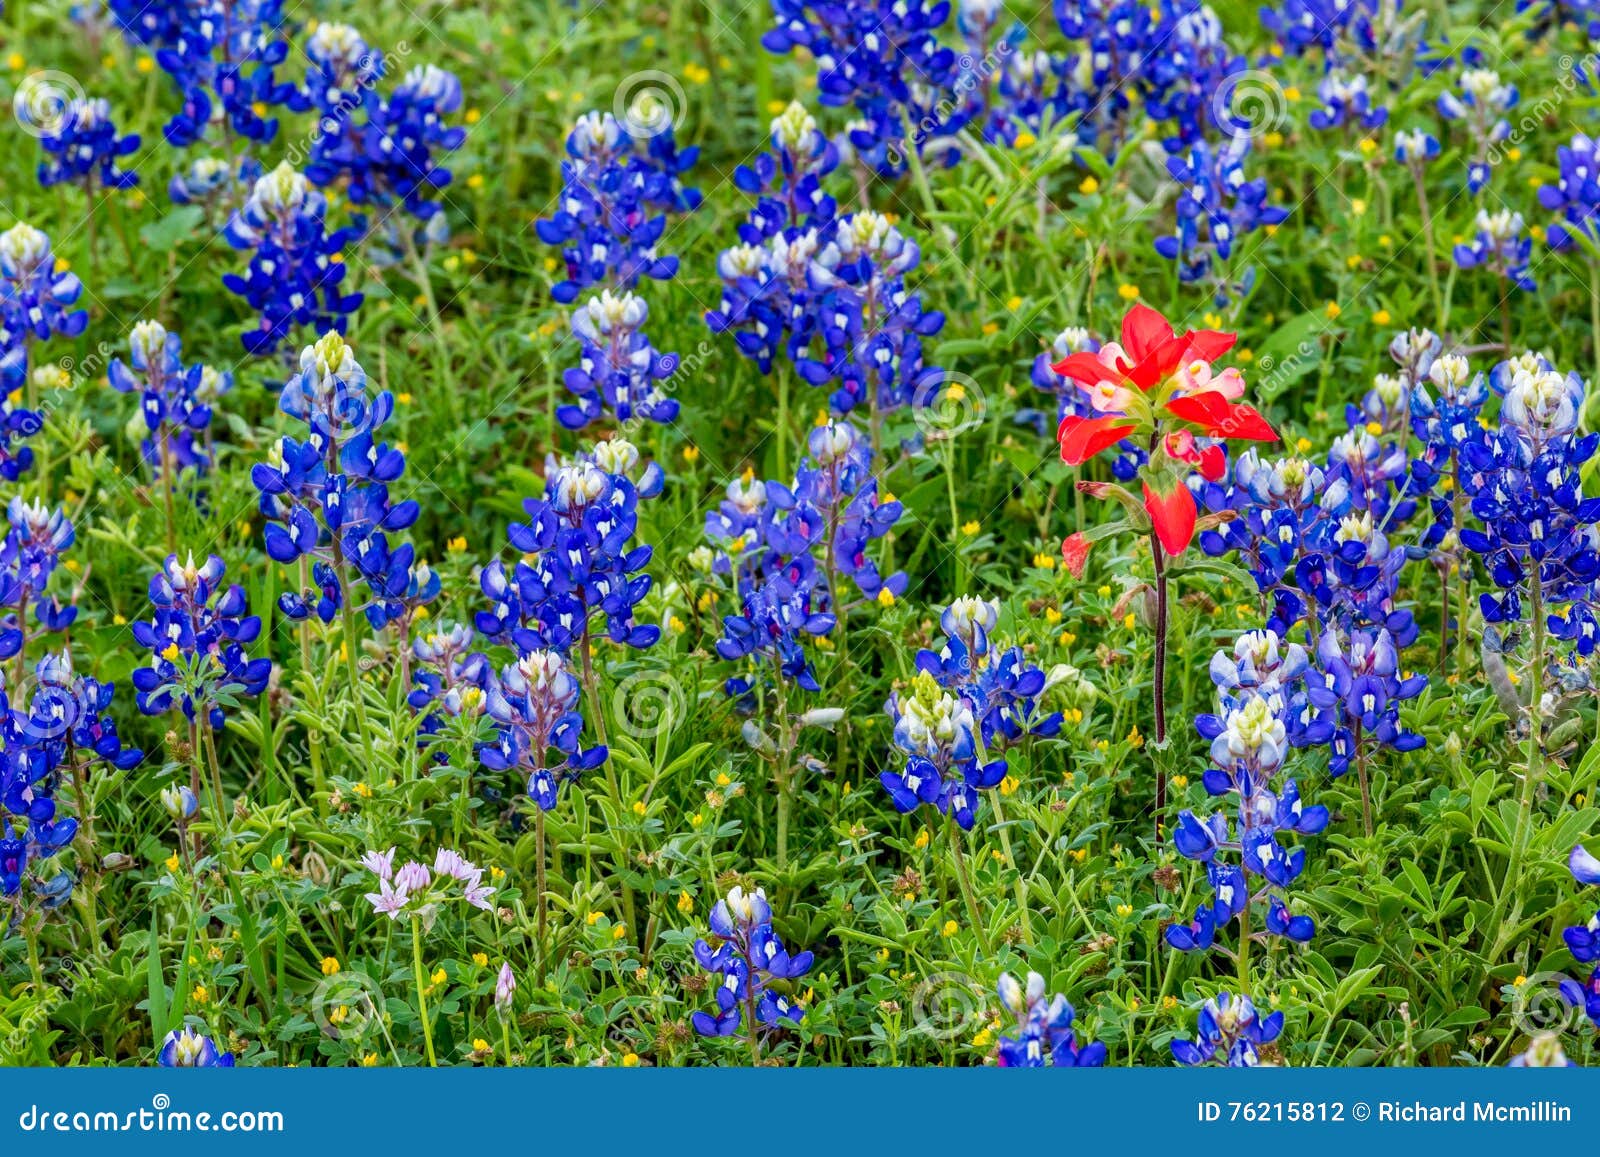 famous texas bluebonnet (lupinus texensis) wildflowers.